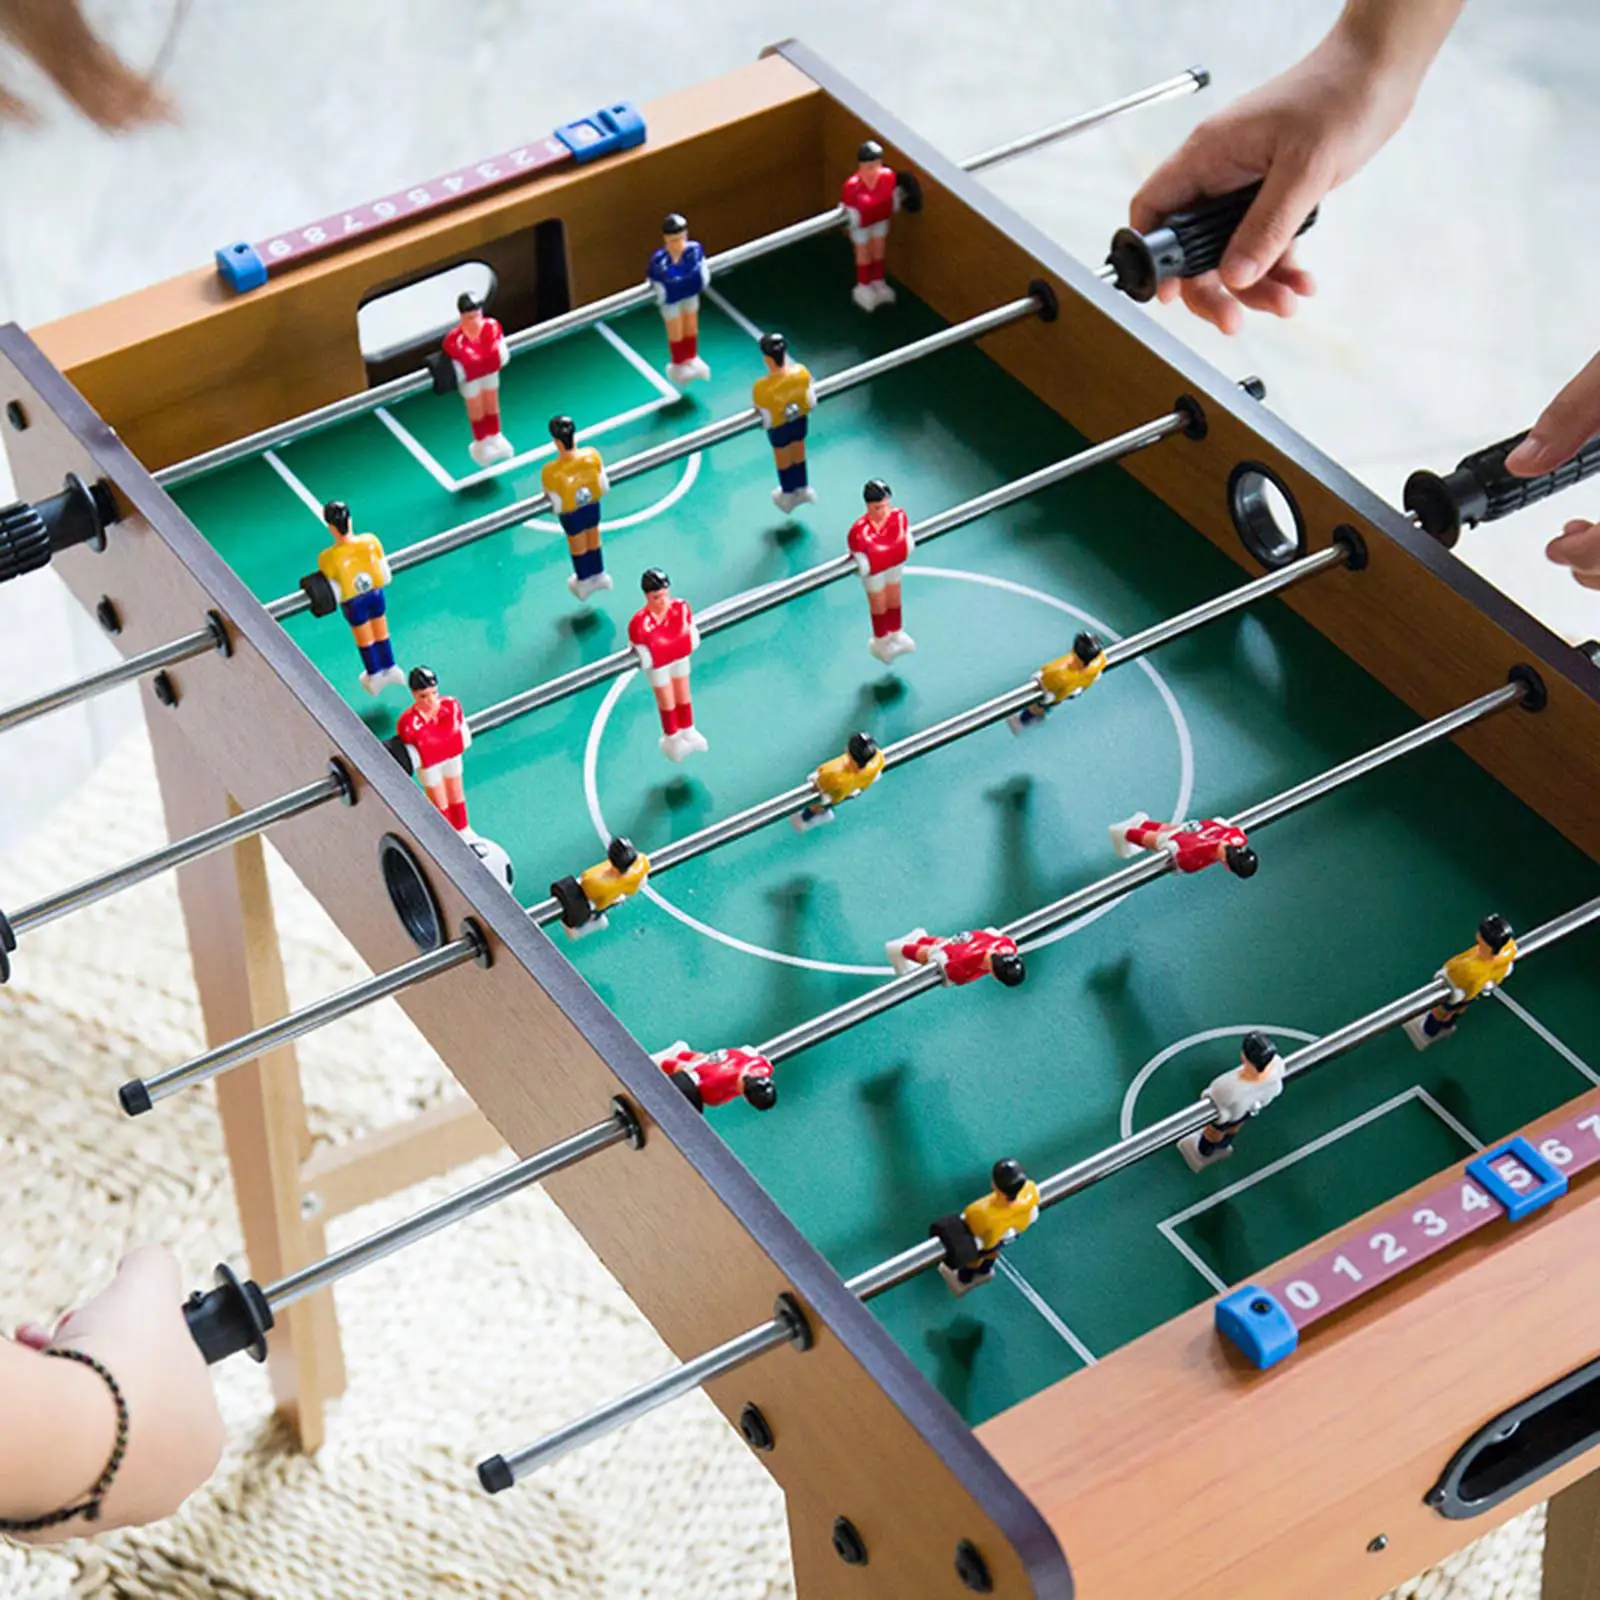 Wood Foosball Table with Ball Sports Tabletop Football Game Toy Table Top Football Table for Outdoor Adults Party